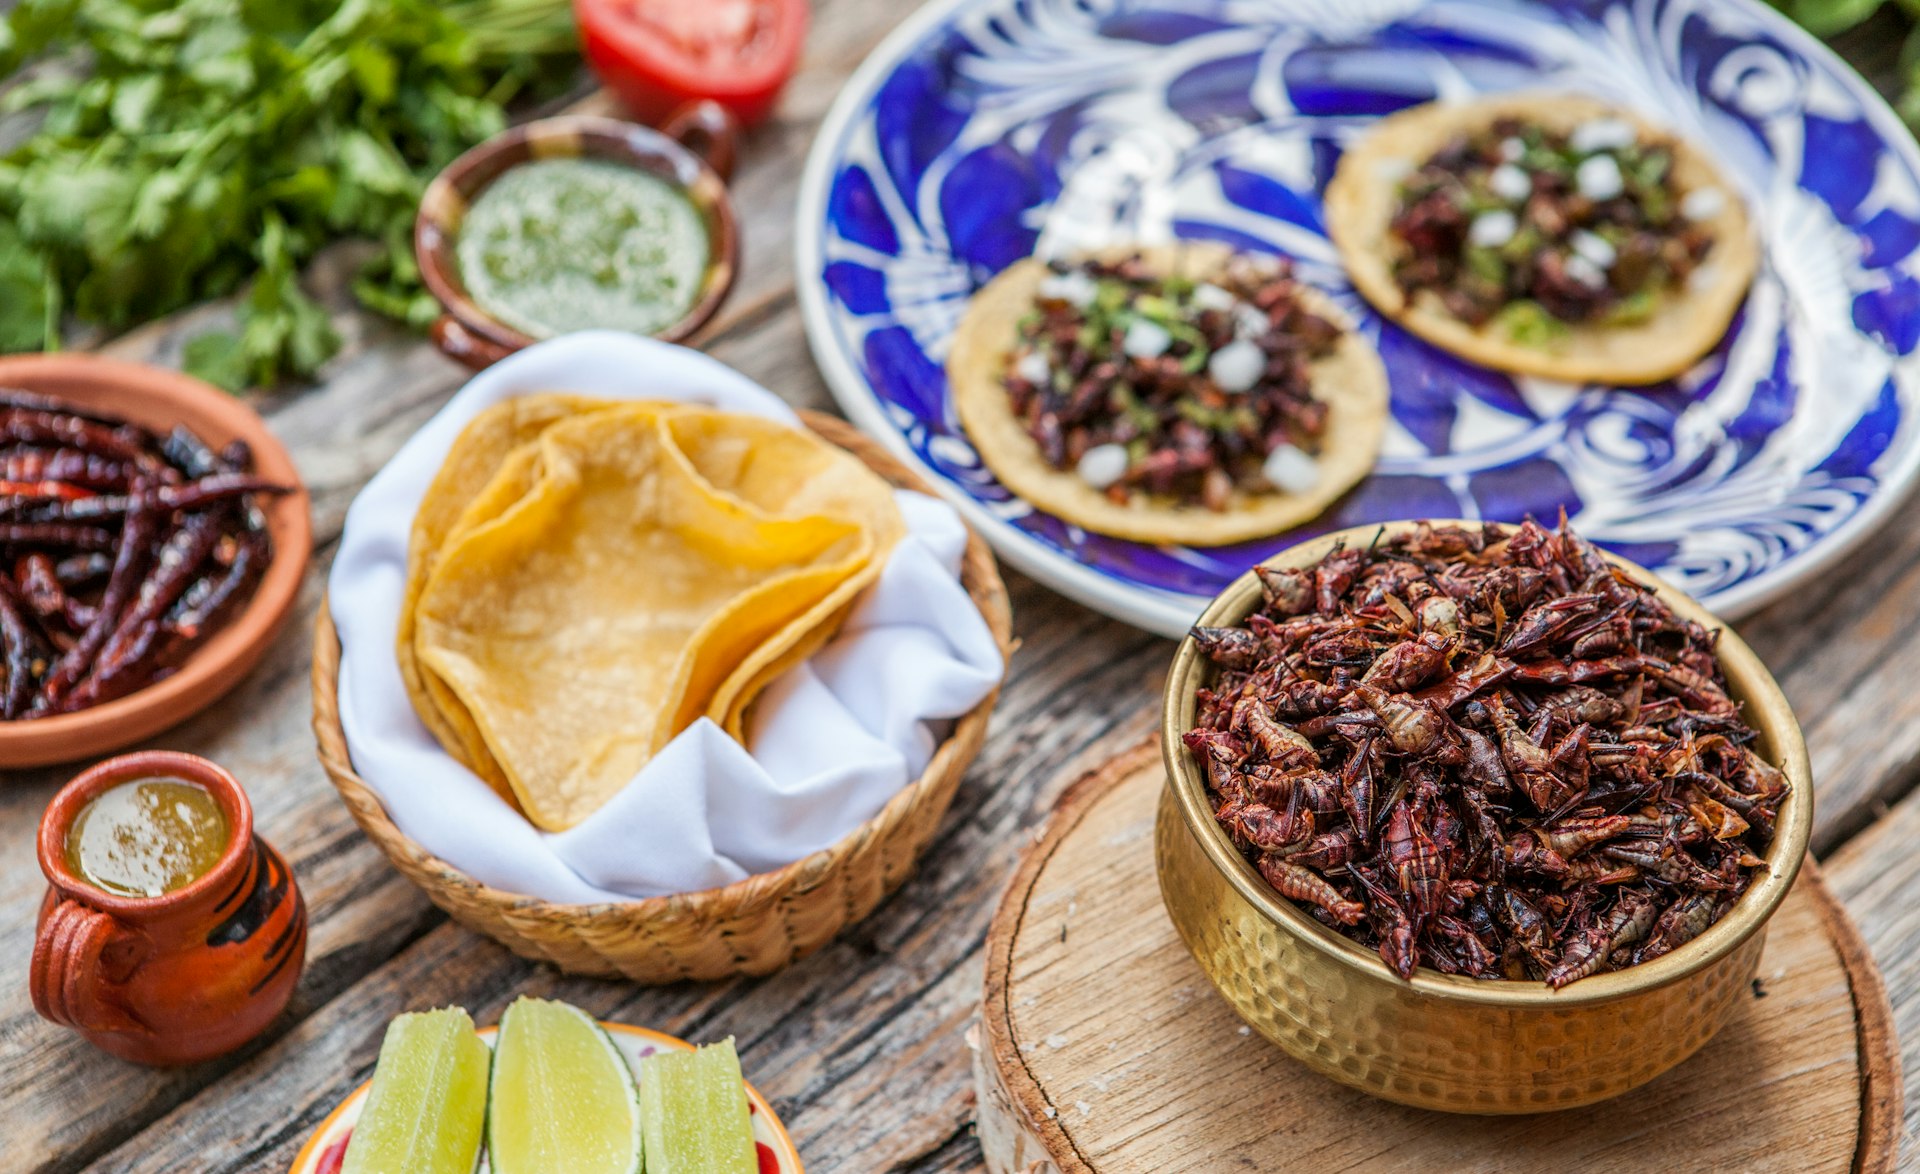 Large Mexican food spread containing corn tortillas, dried chillies, slices of lime, a small ceramic jar of green sauce, a basket full of cooked grasshoppers and two fully assembled tacos on a large blue and white plate 